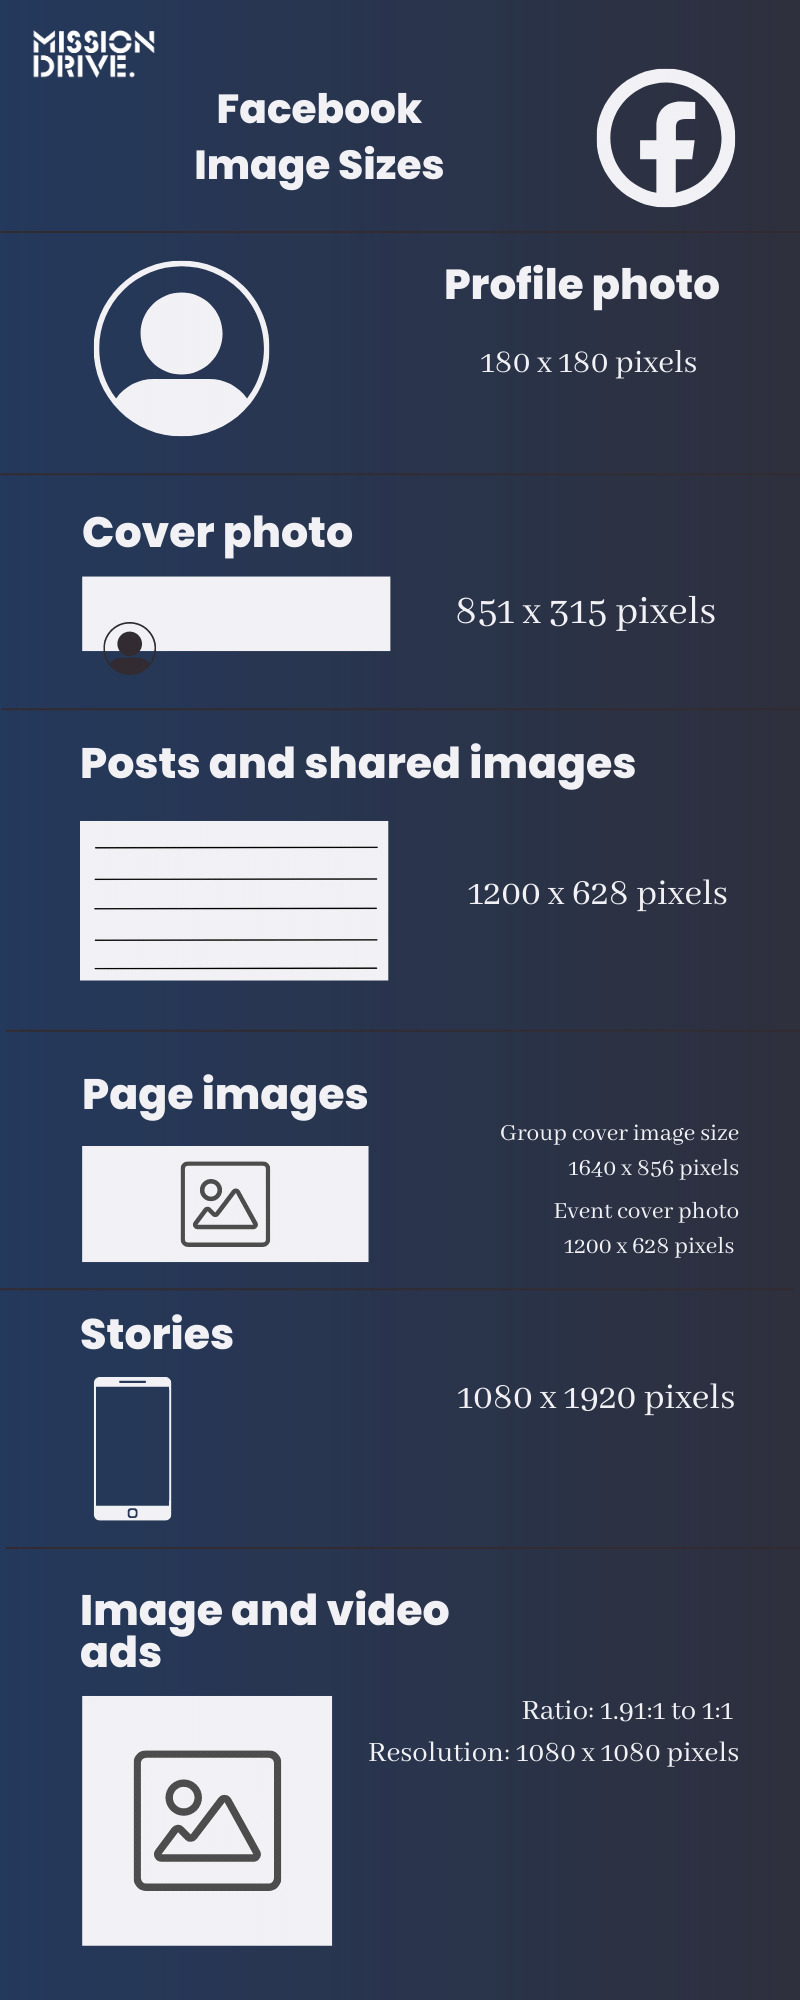 Facebook image size guide (1)